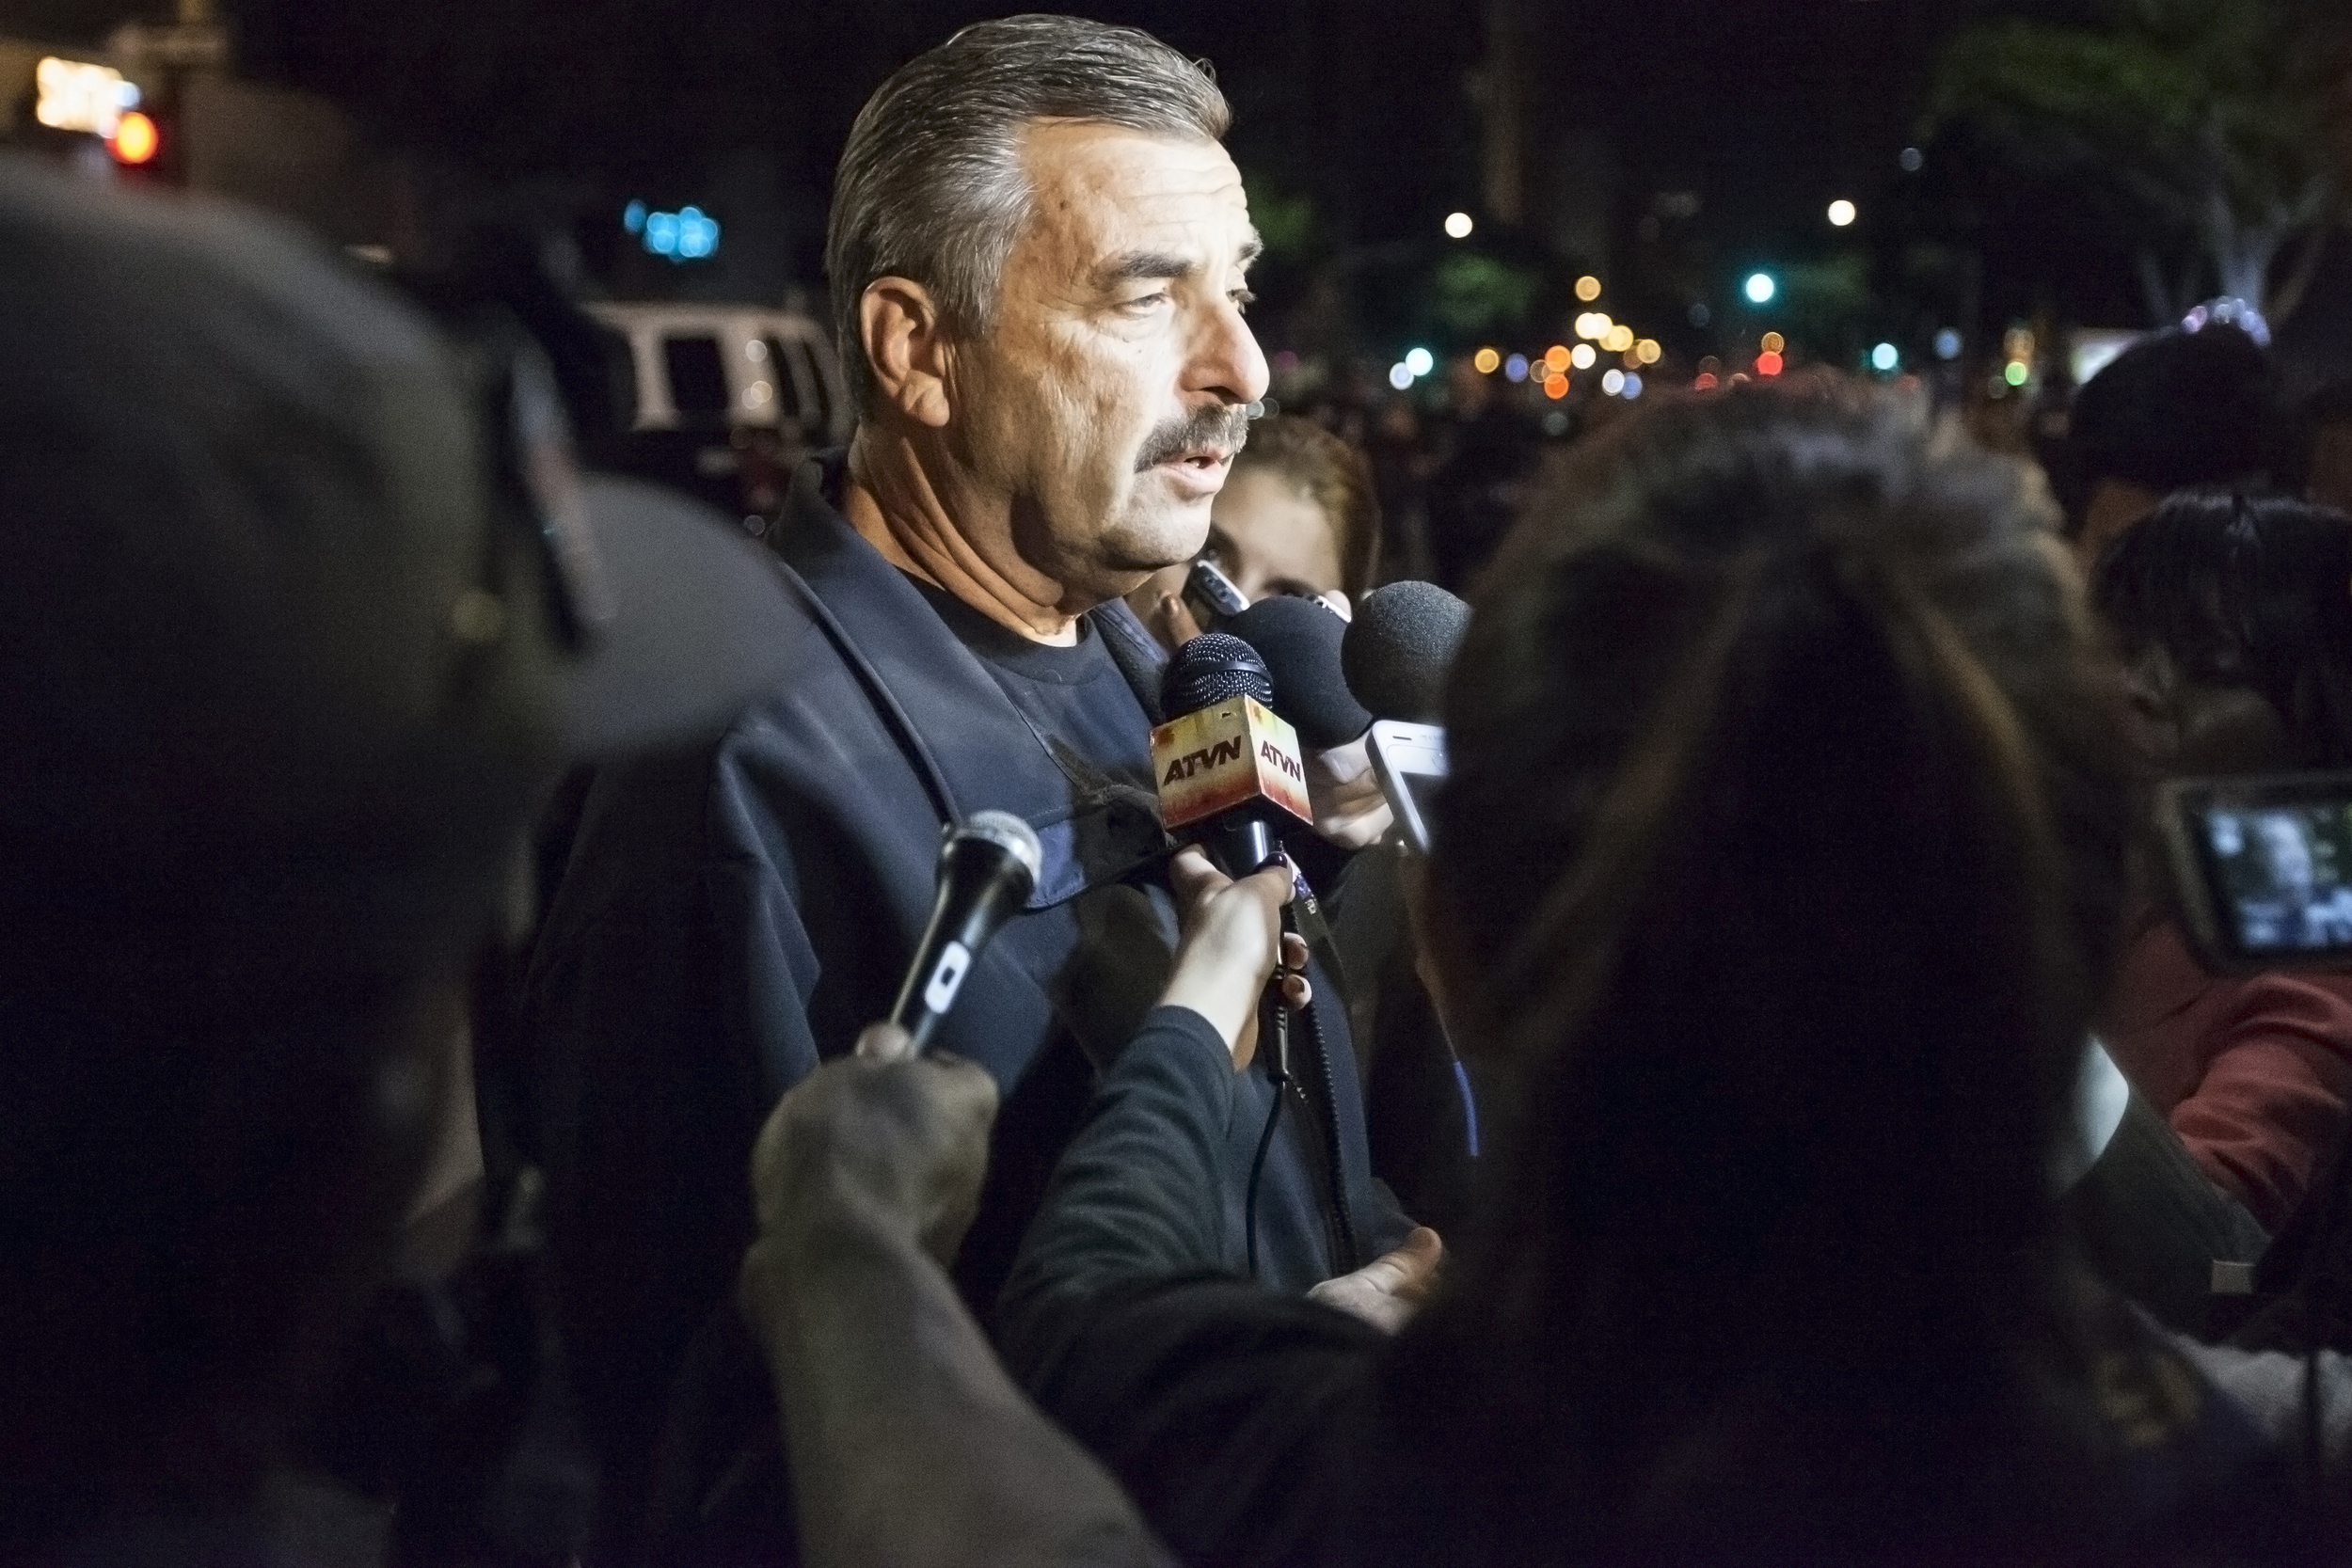  LAPD chief Charlie Beck talks to news media after the arrest of more than 100 protesters during a rally in opposition to the non-indictment of officer Darren Wilson after the shooting death of Mike Brown after an altercation in Ferguson Miss. Wednes